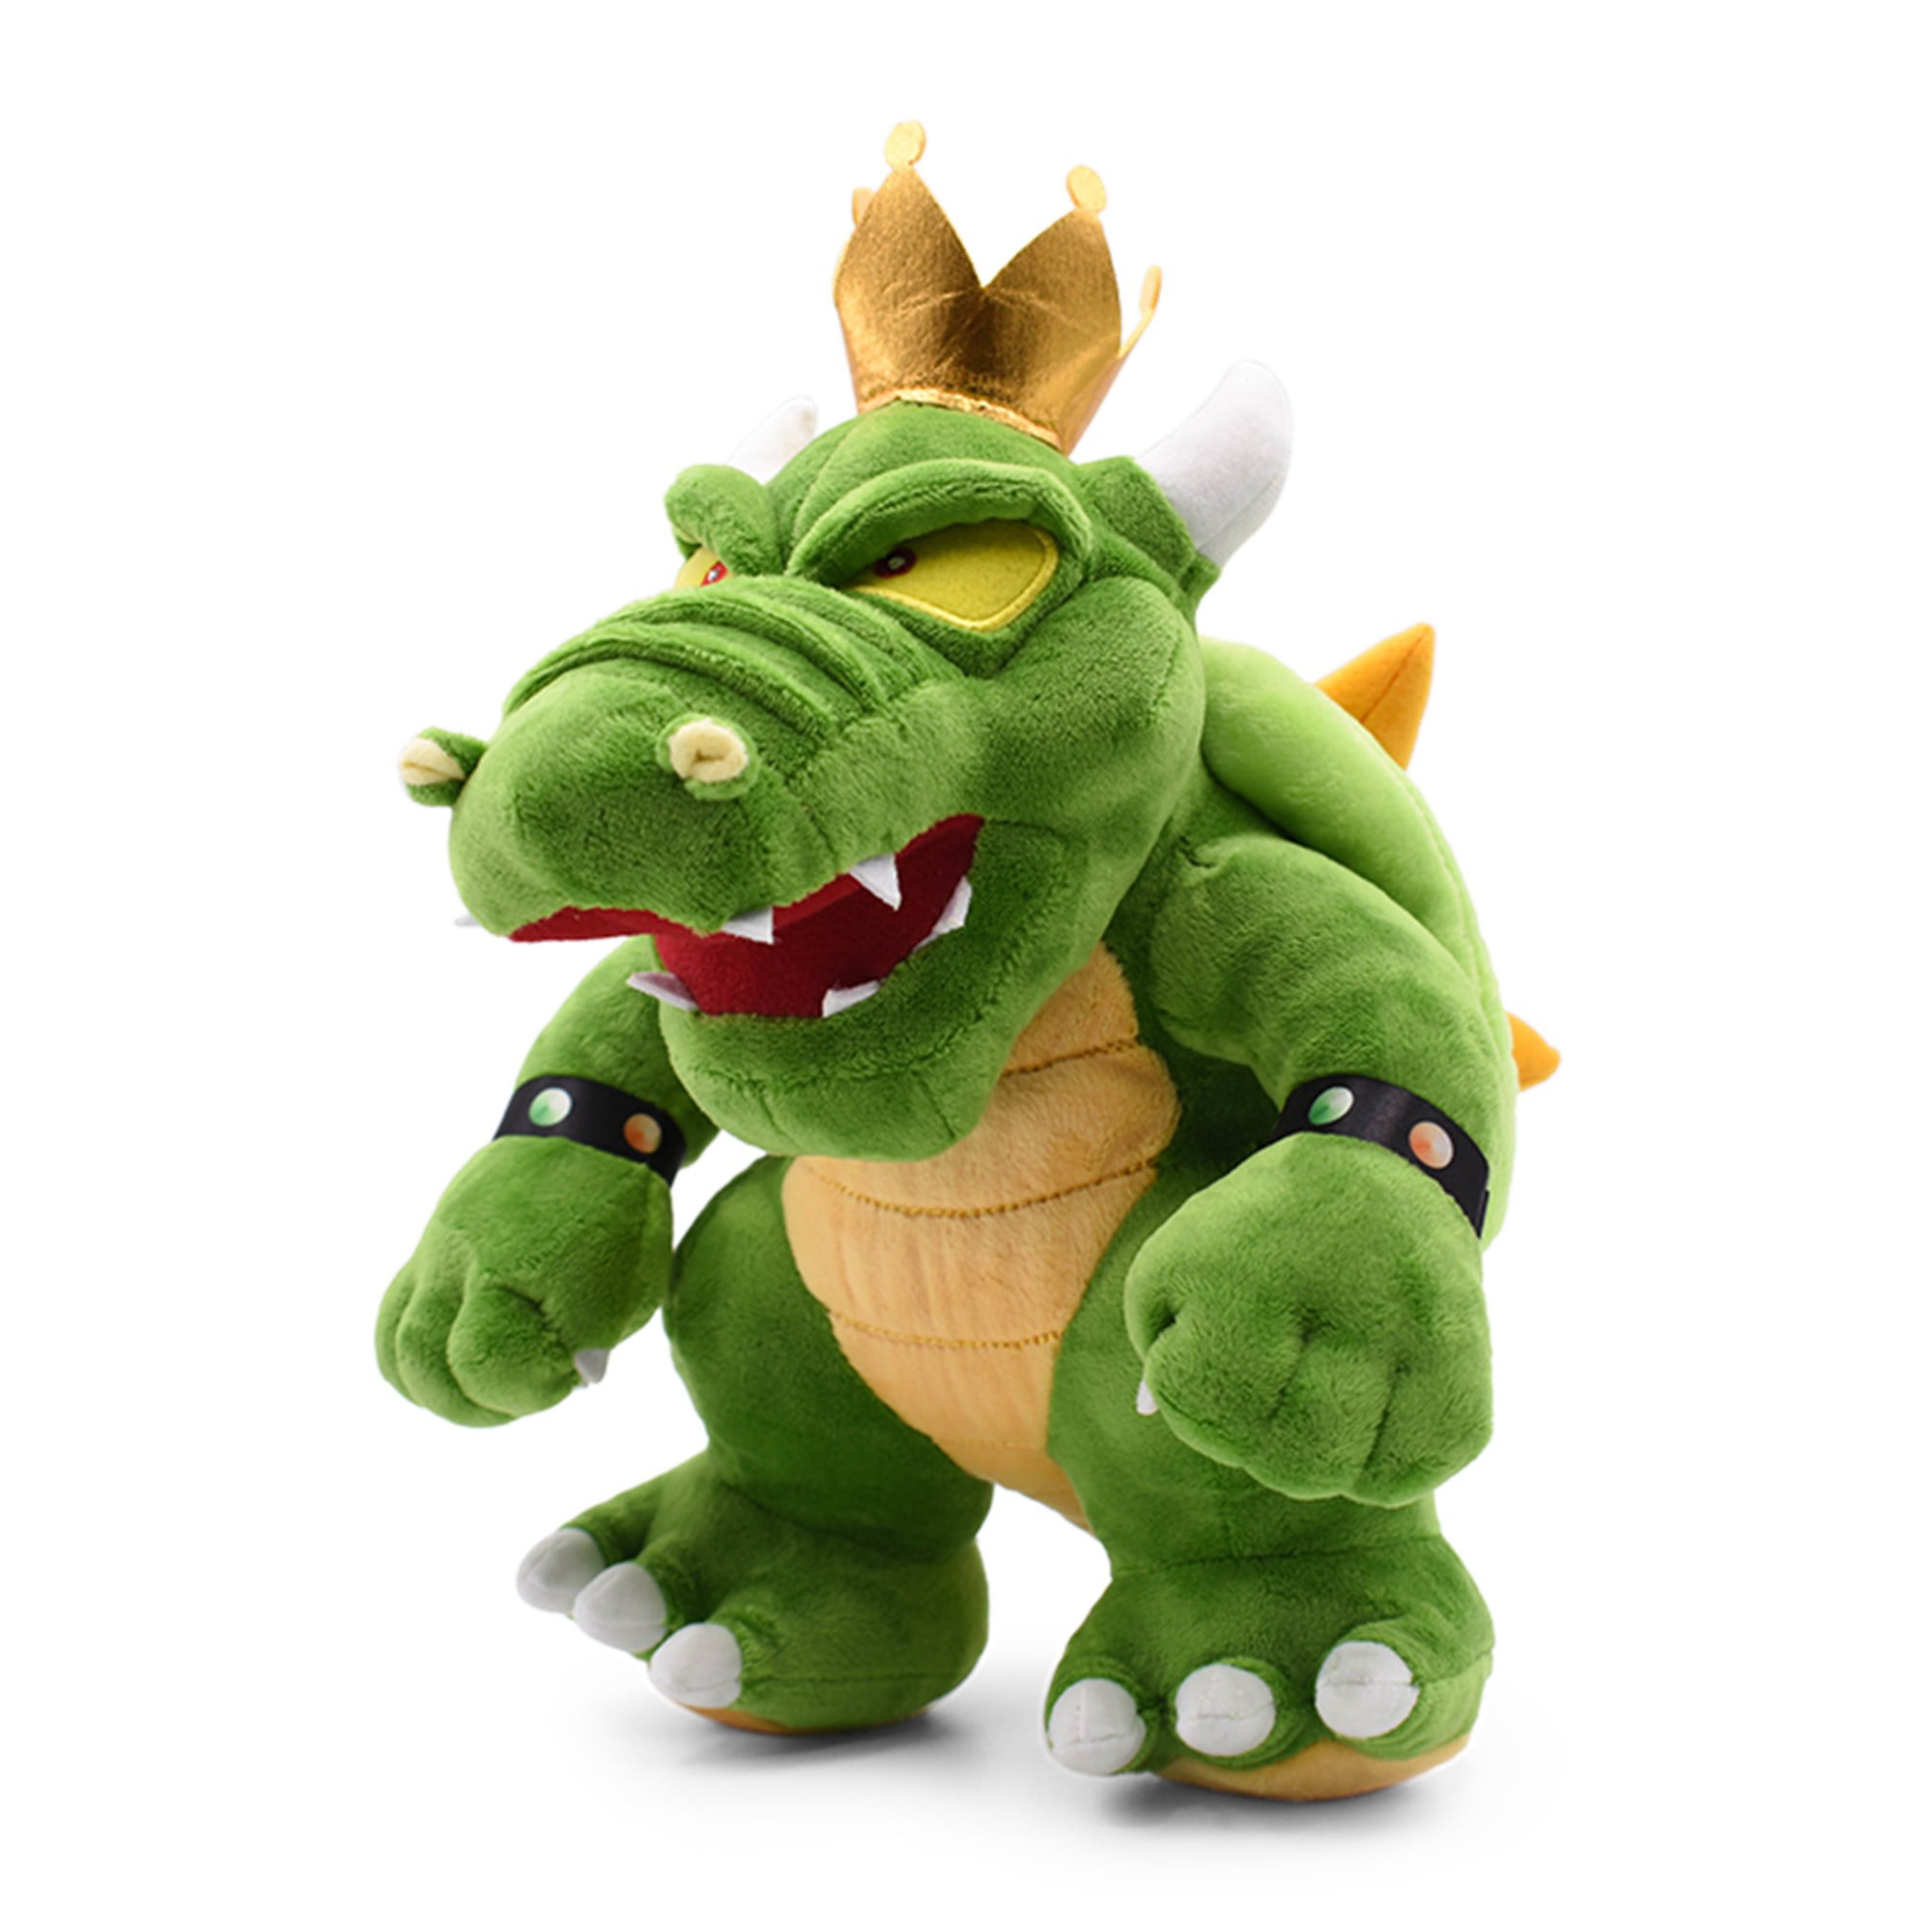 Super Mario Bros Bowser King Koopa Plush Soft Doll Figure Stuffed Toy 10" Gift for sale online 